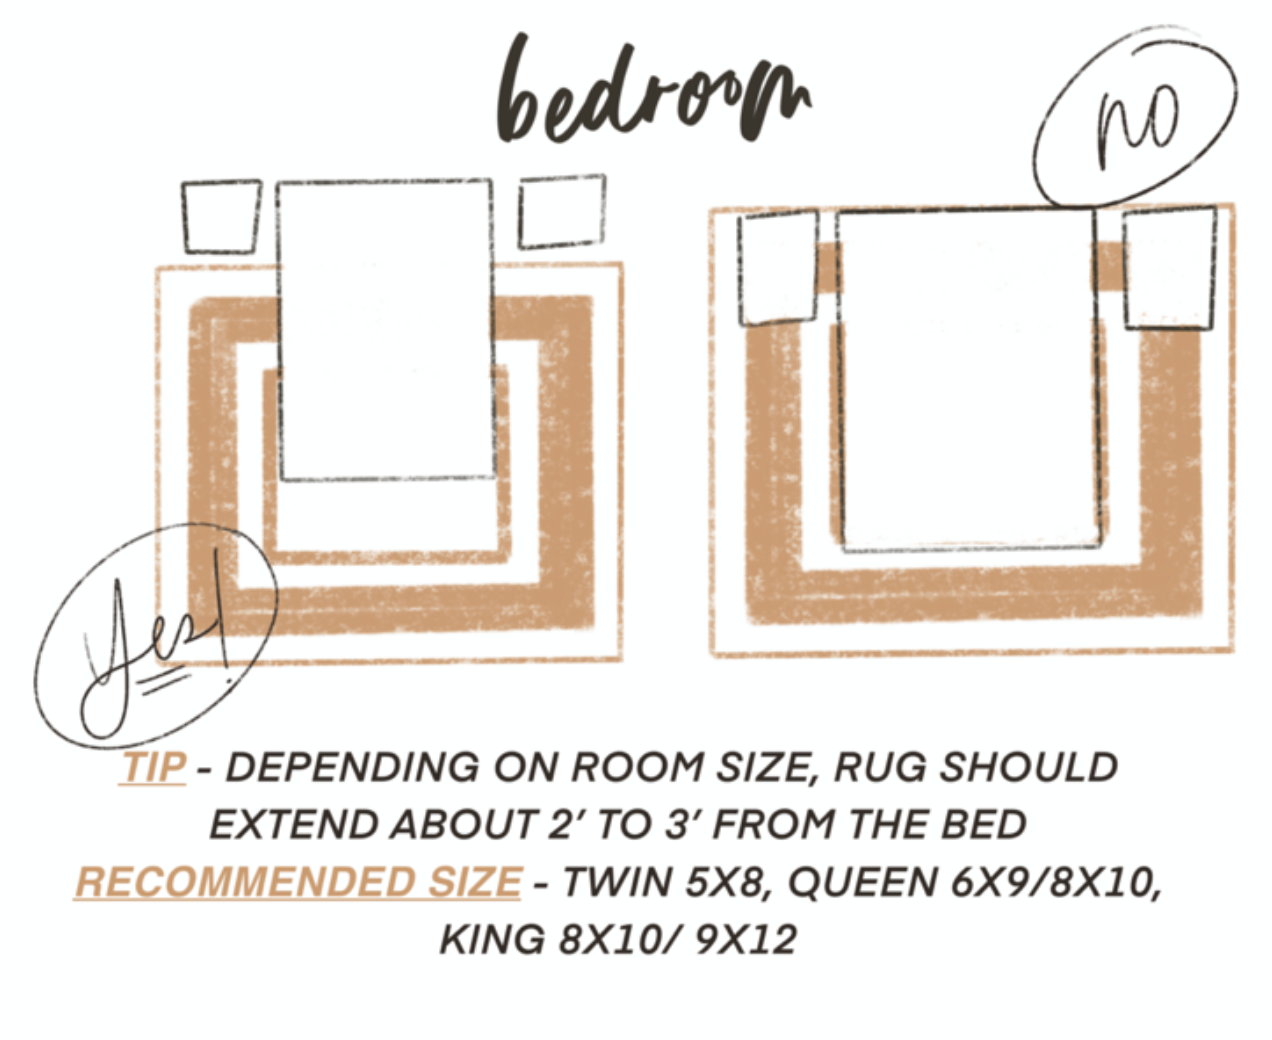 Size Rug With Guide Nesting Grace, How Big Of A Rug Do I Need For Under Queen Bed